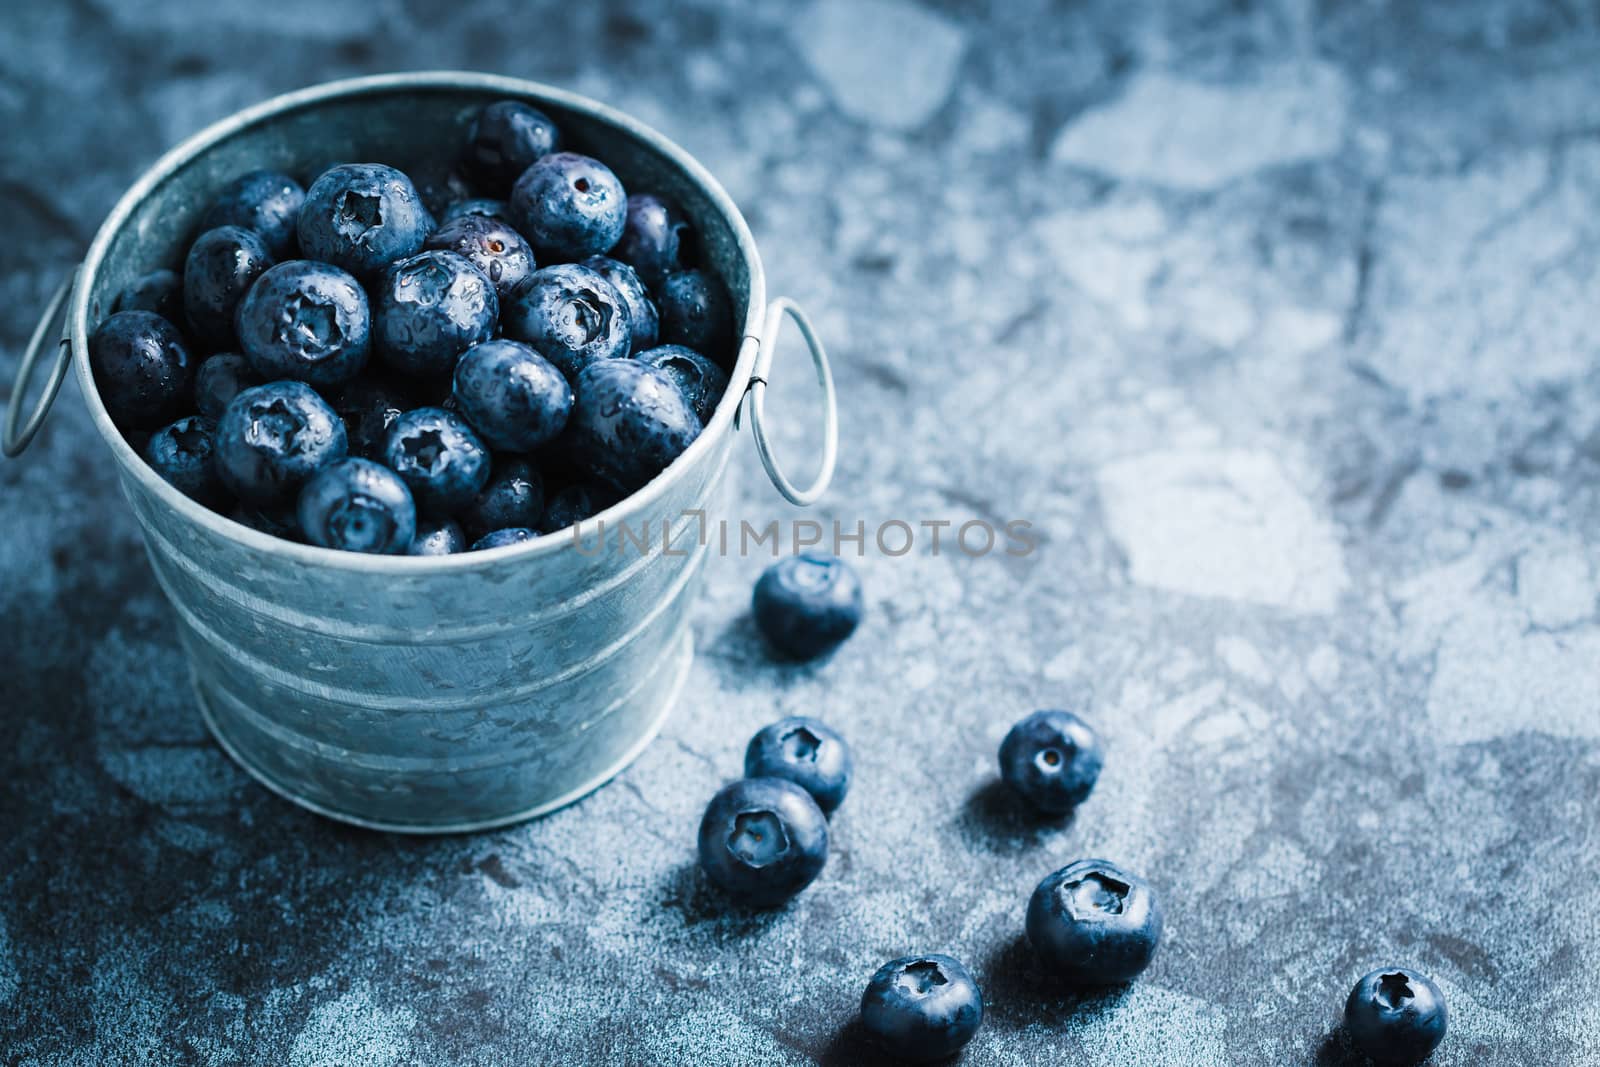 Blueberry in Small tank on wooden background